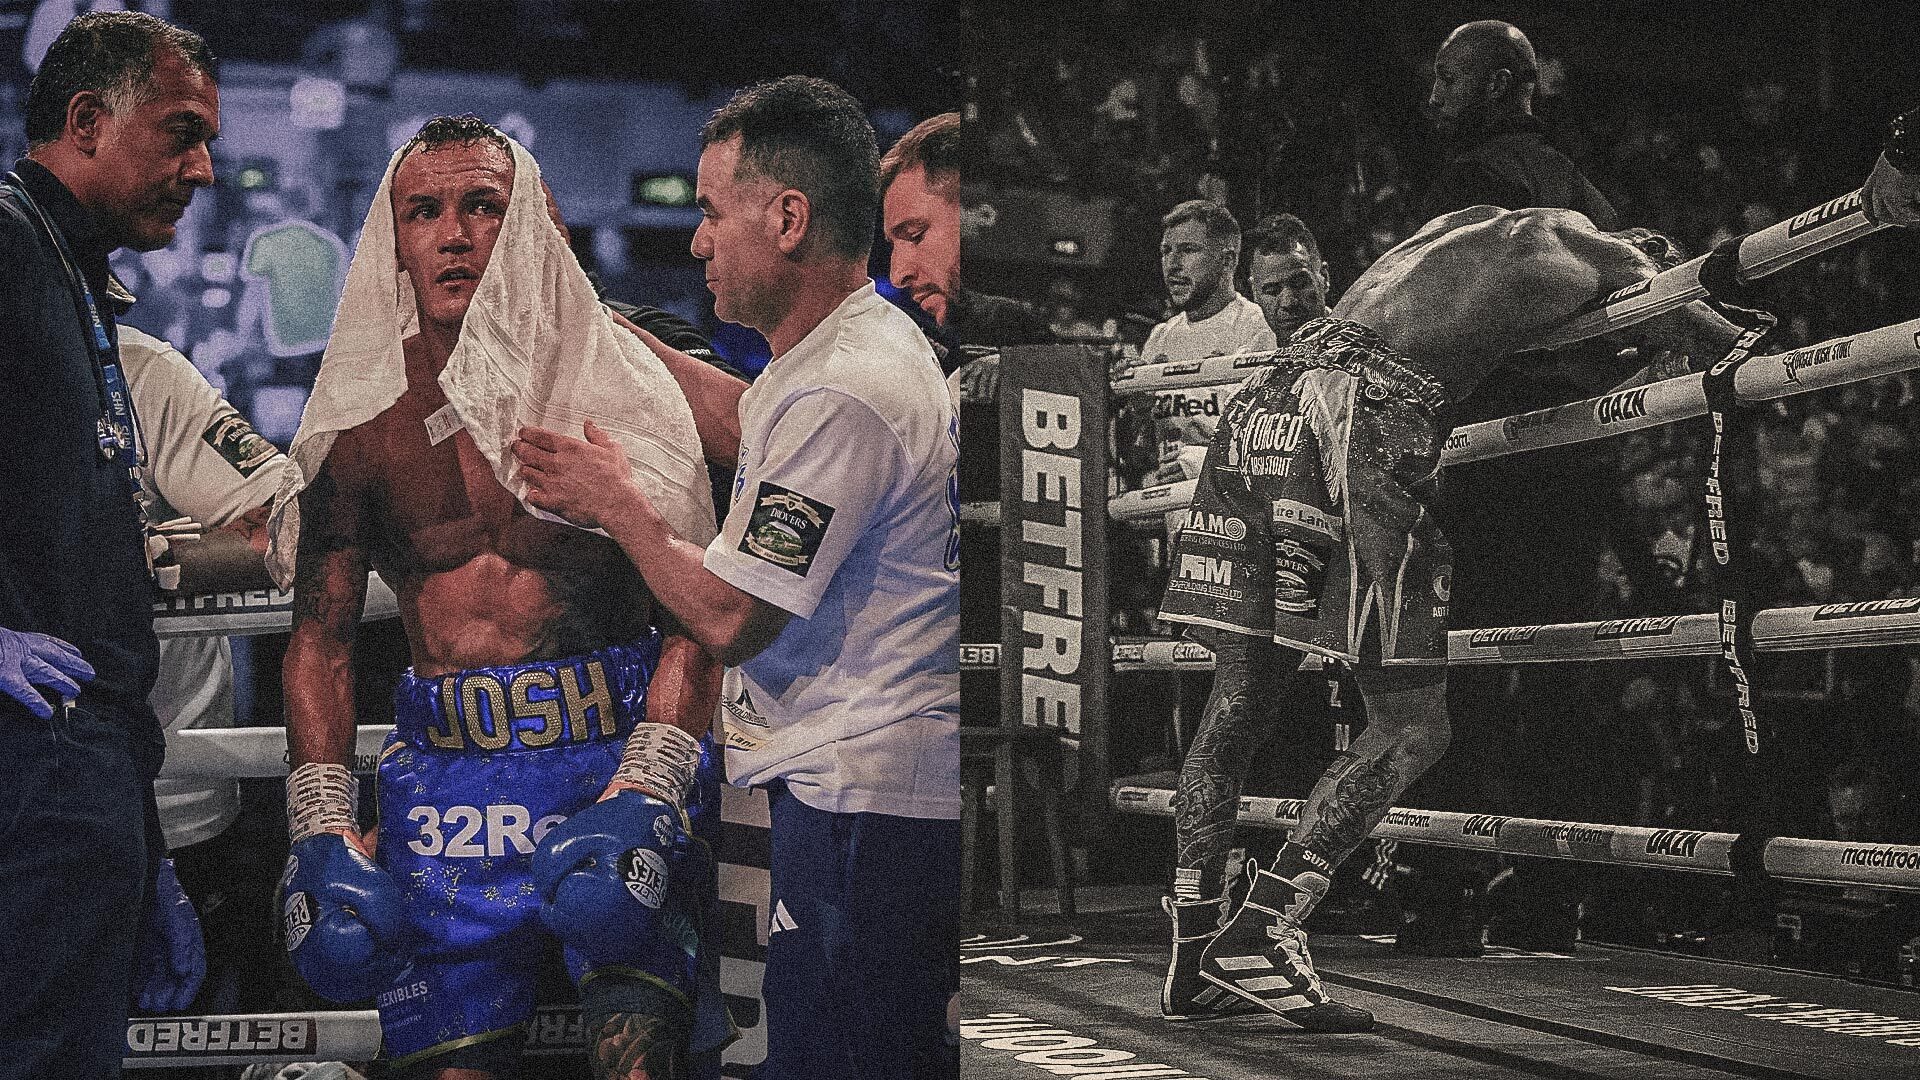 A photo of Josh Warrington with a towel over his head after being knocked out by Leigh Wood, next to a black and white photo of Josh draped over the ropes afterwards, gutted